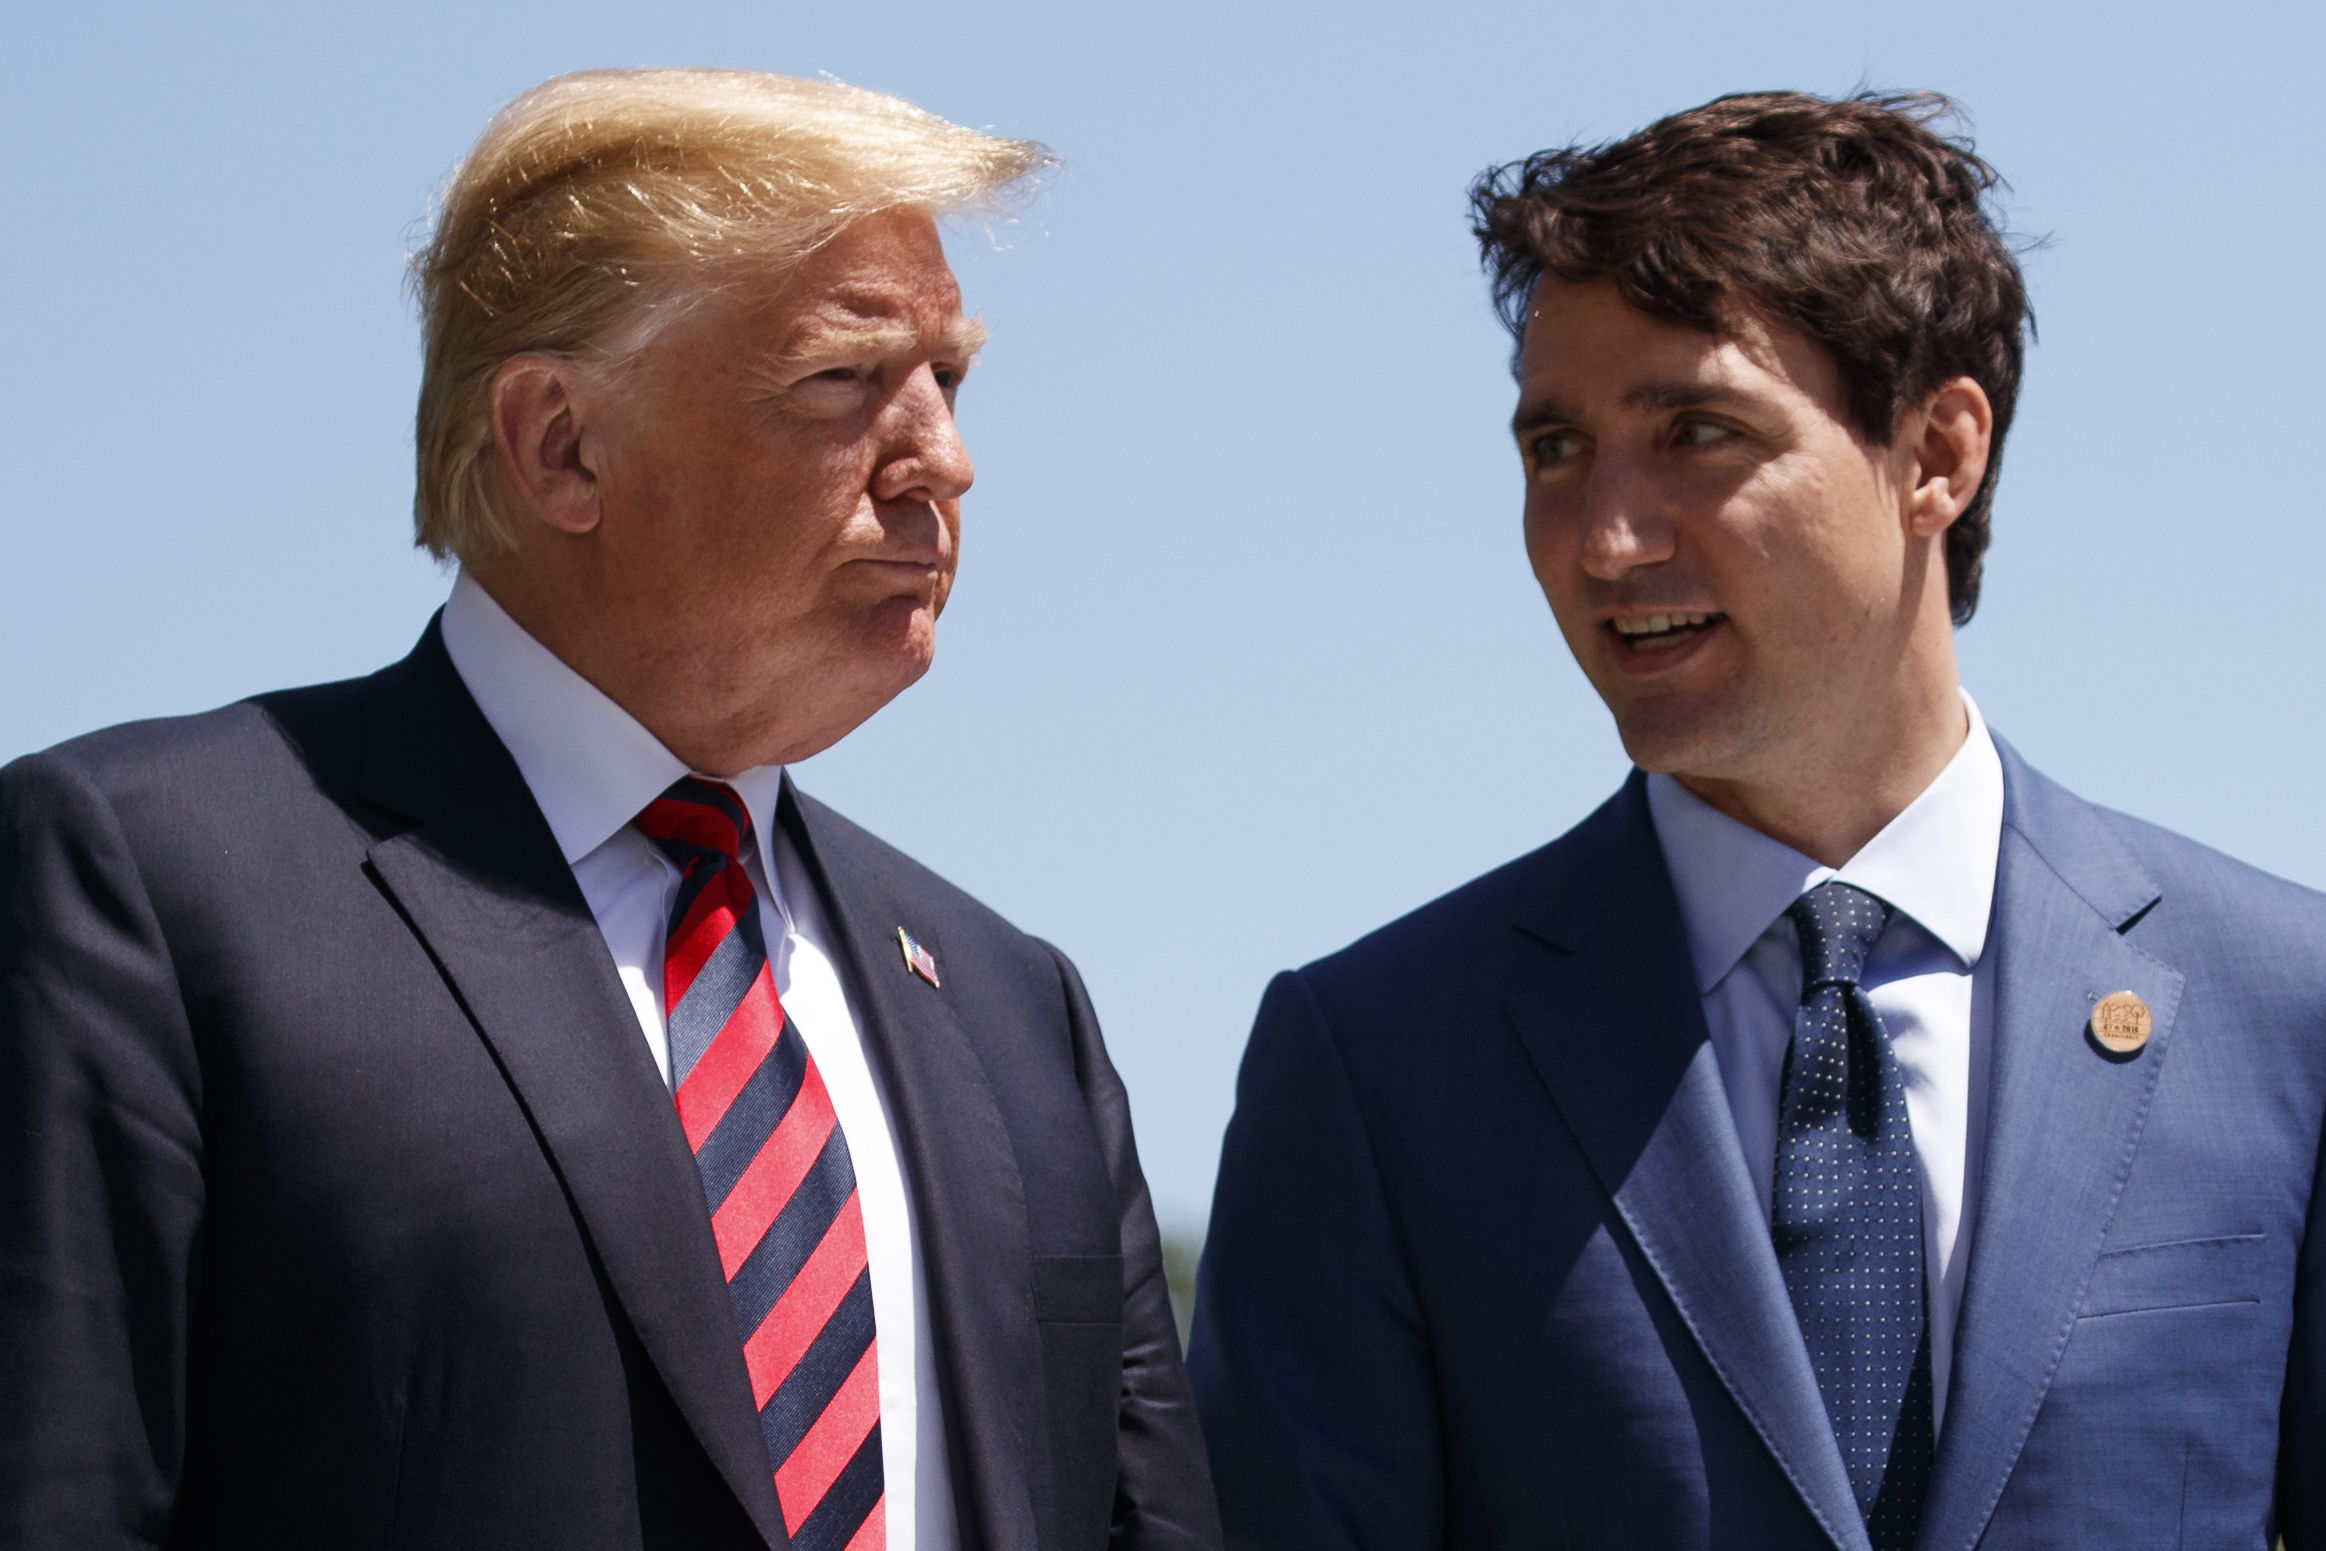 President Donald Trump talks with Canadian Prime Minister Justin Trudeau at the G7 Summit